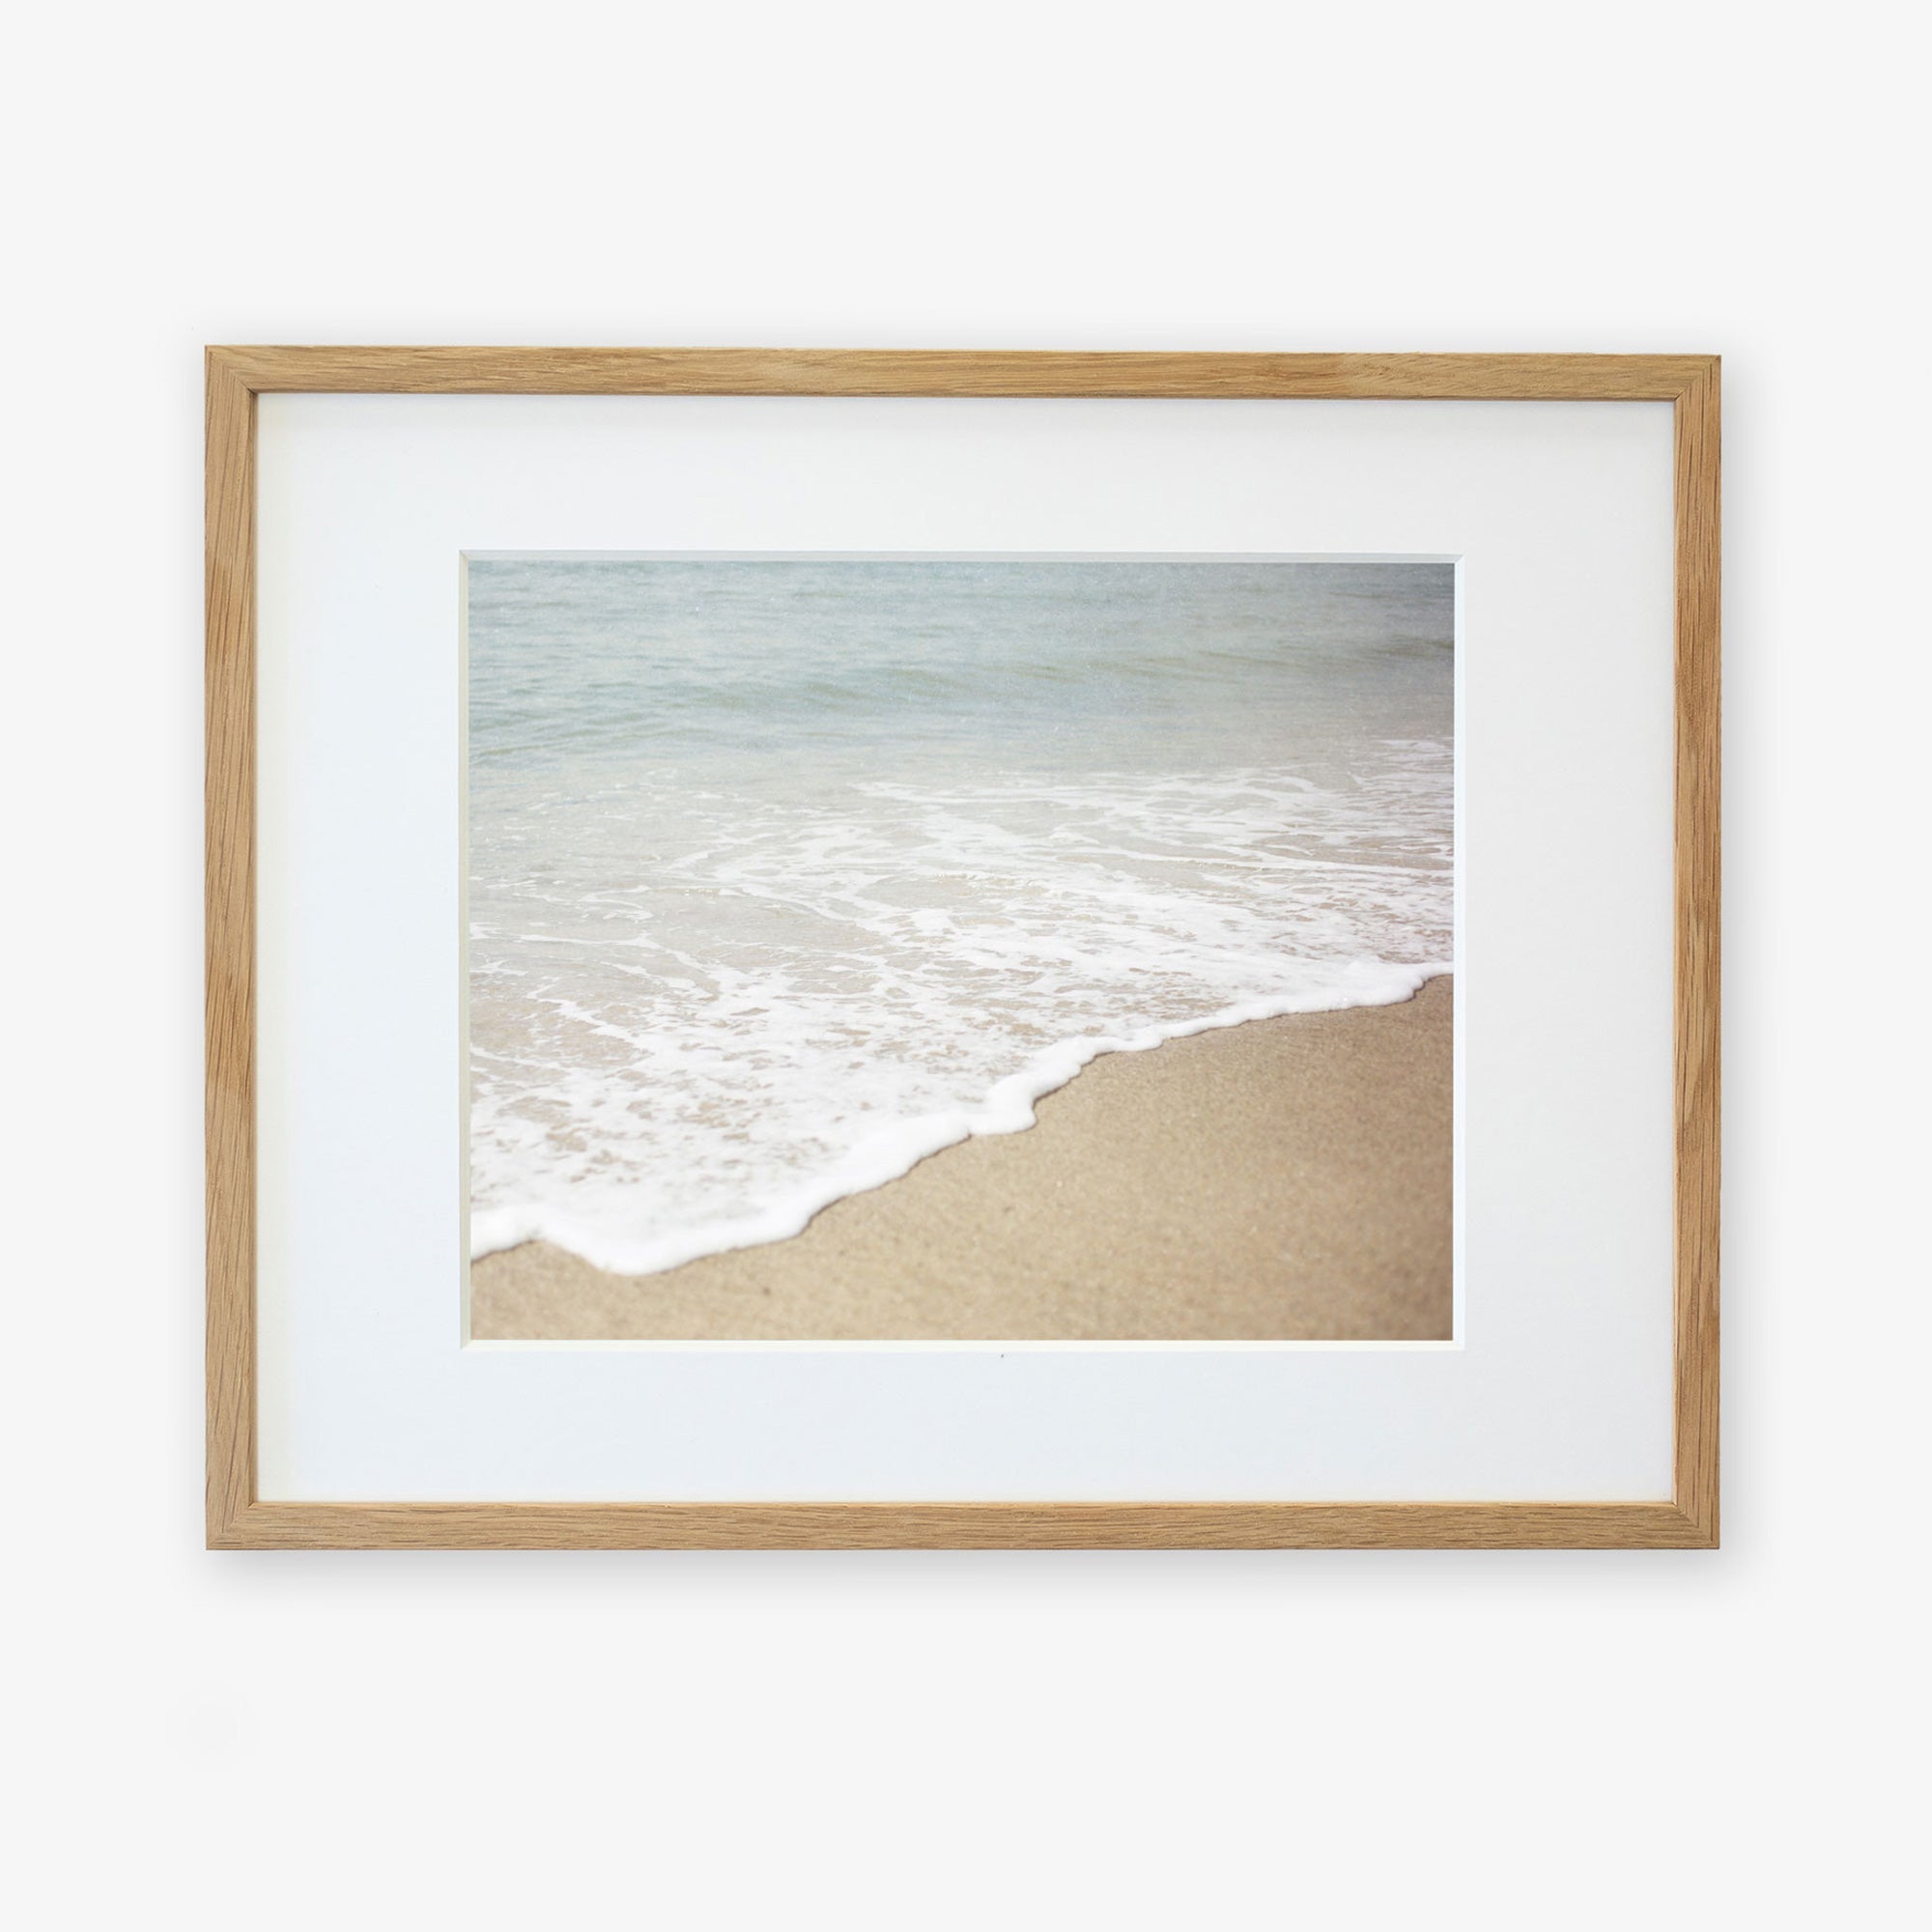 Framed photograph of a serene California beach scene showing Beach Waves Print, 'Chasing Surf' printed on archival photographic paper and encased in a light wooden frame against a white background. Brand: Offley Green.